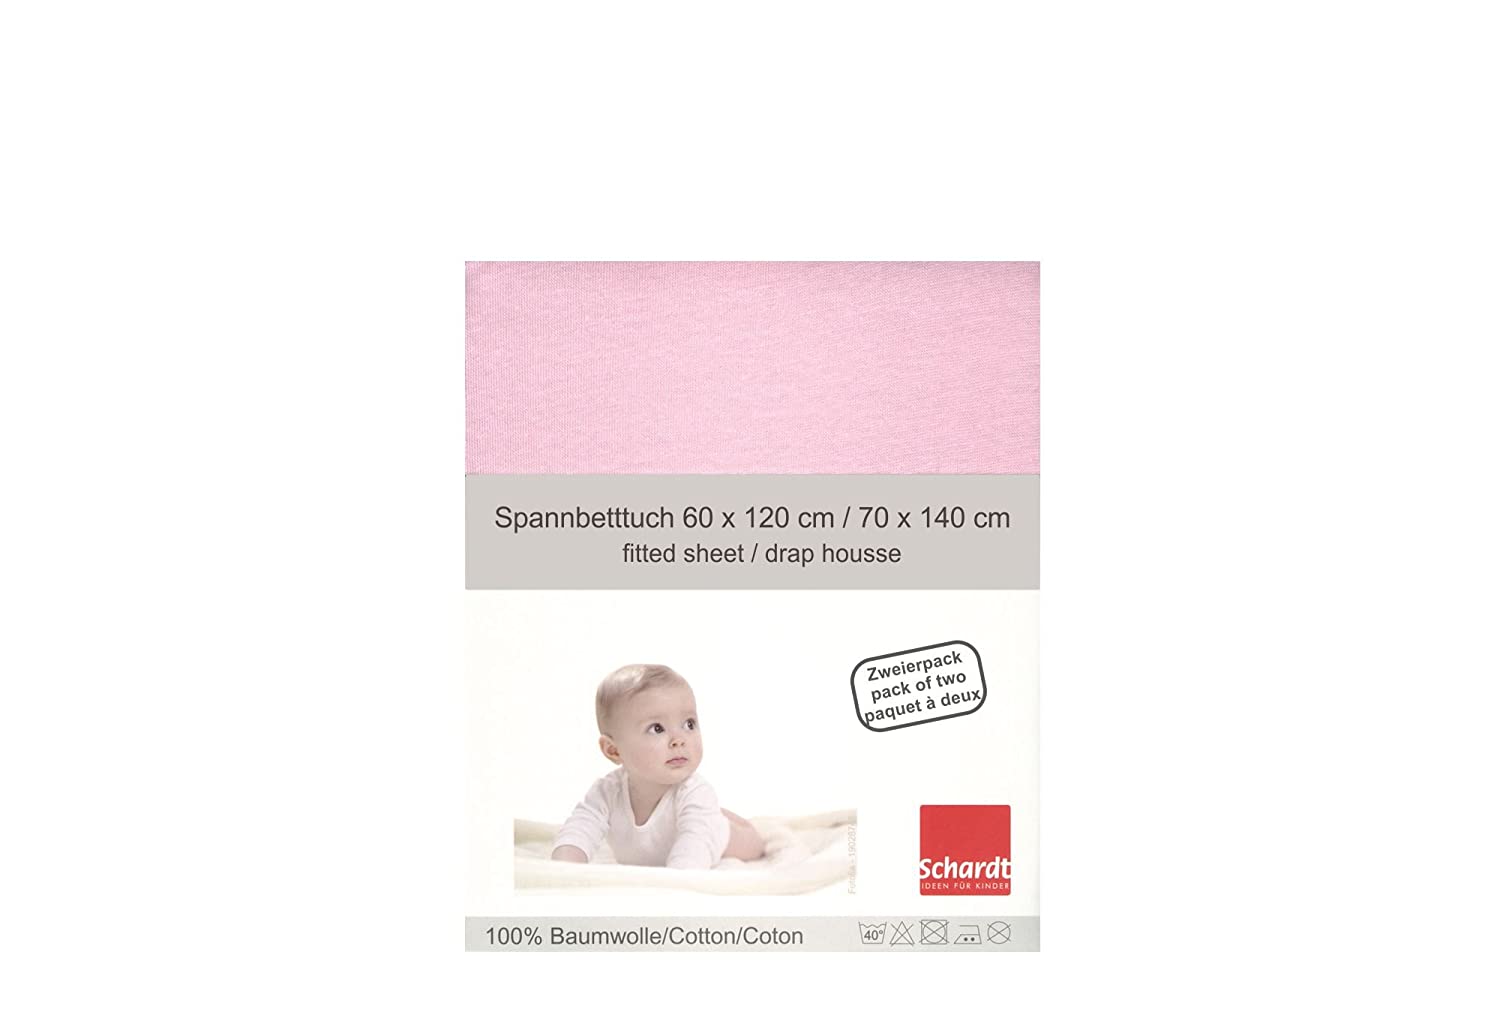 Schardt 13 851 31 Jersey Fitted Bed Sheet, Twin Pack, Pink